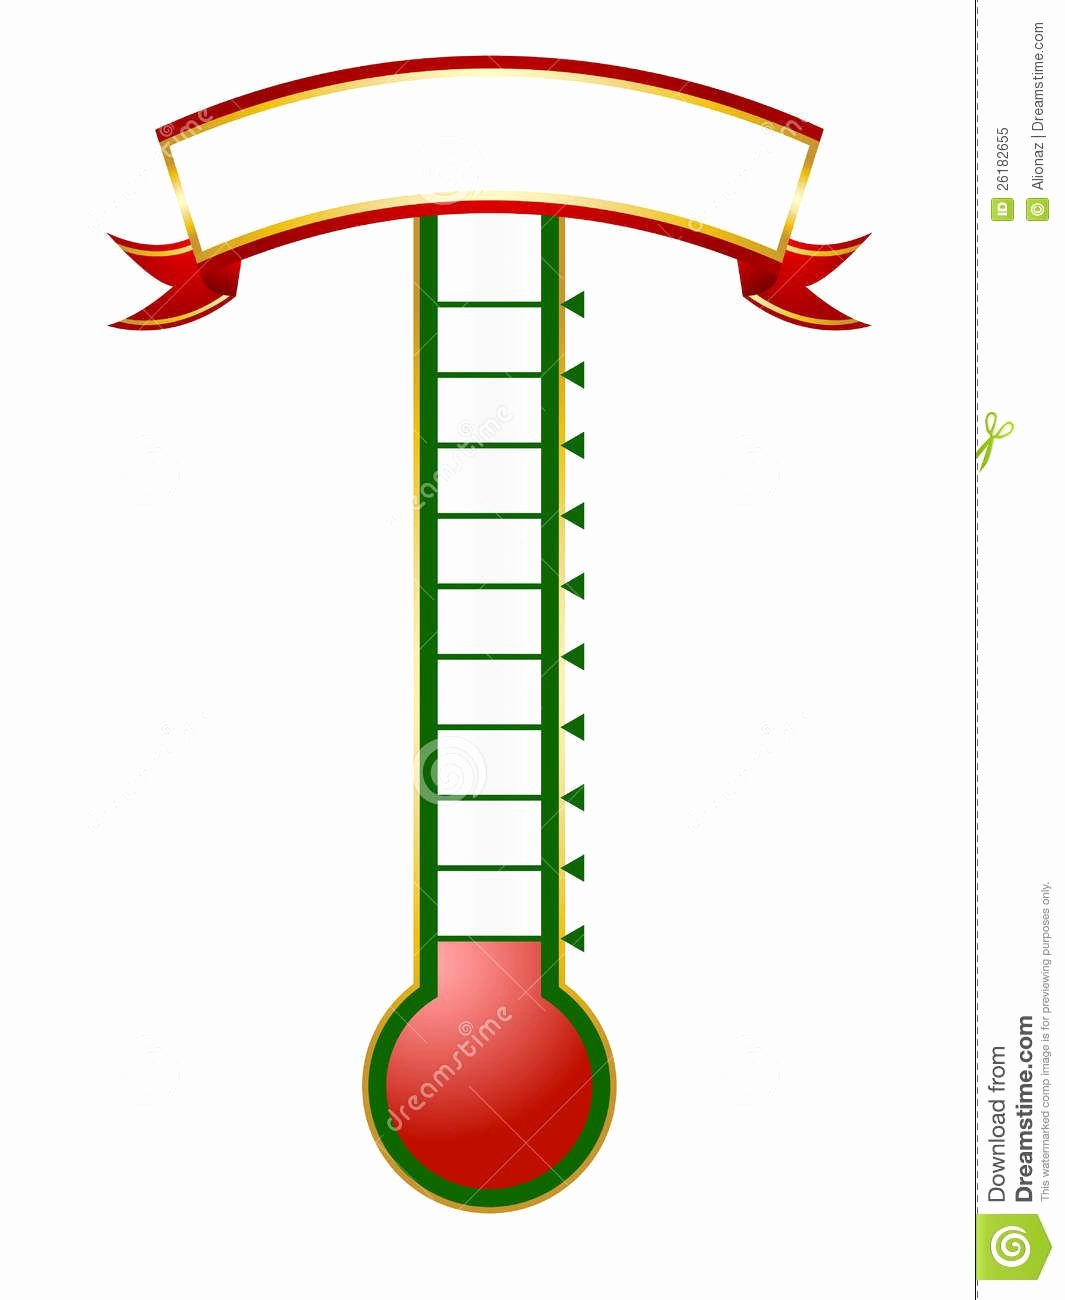 Printable thermometer Goal Chart Luxury thermometer Template